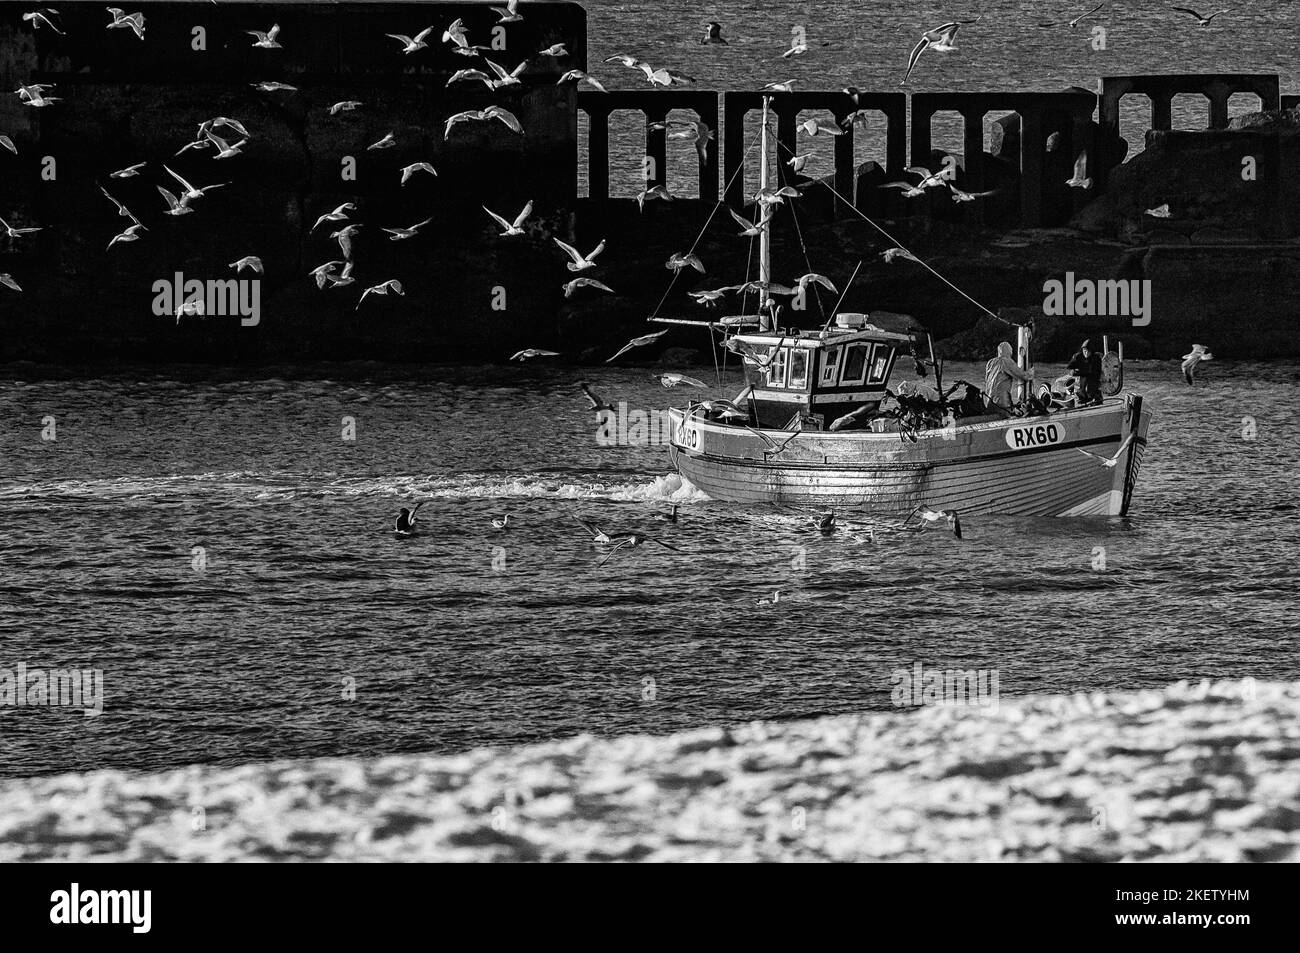 The Stade fishing beach, Old Town, Hastings. Fishermen bringing home their catch on a snow covered beach with a flock of herring gulls around them. East Sussex. England. UK Stock Photo